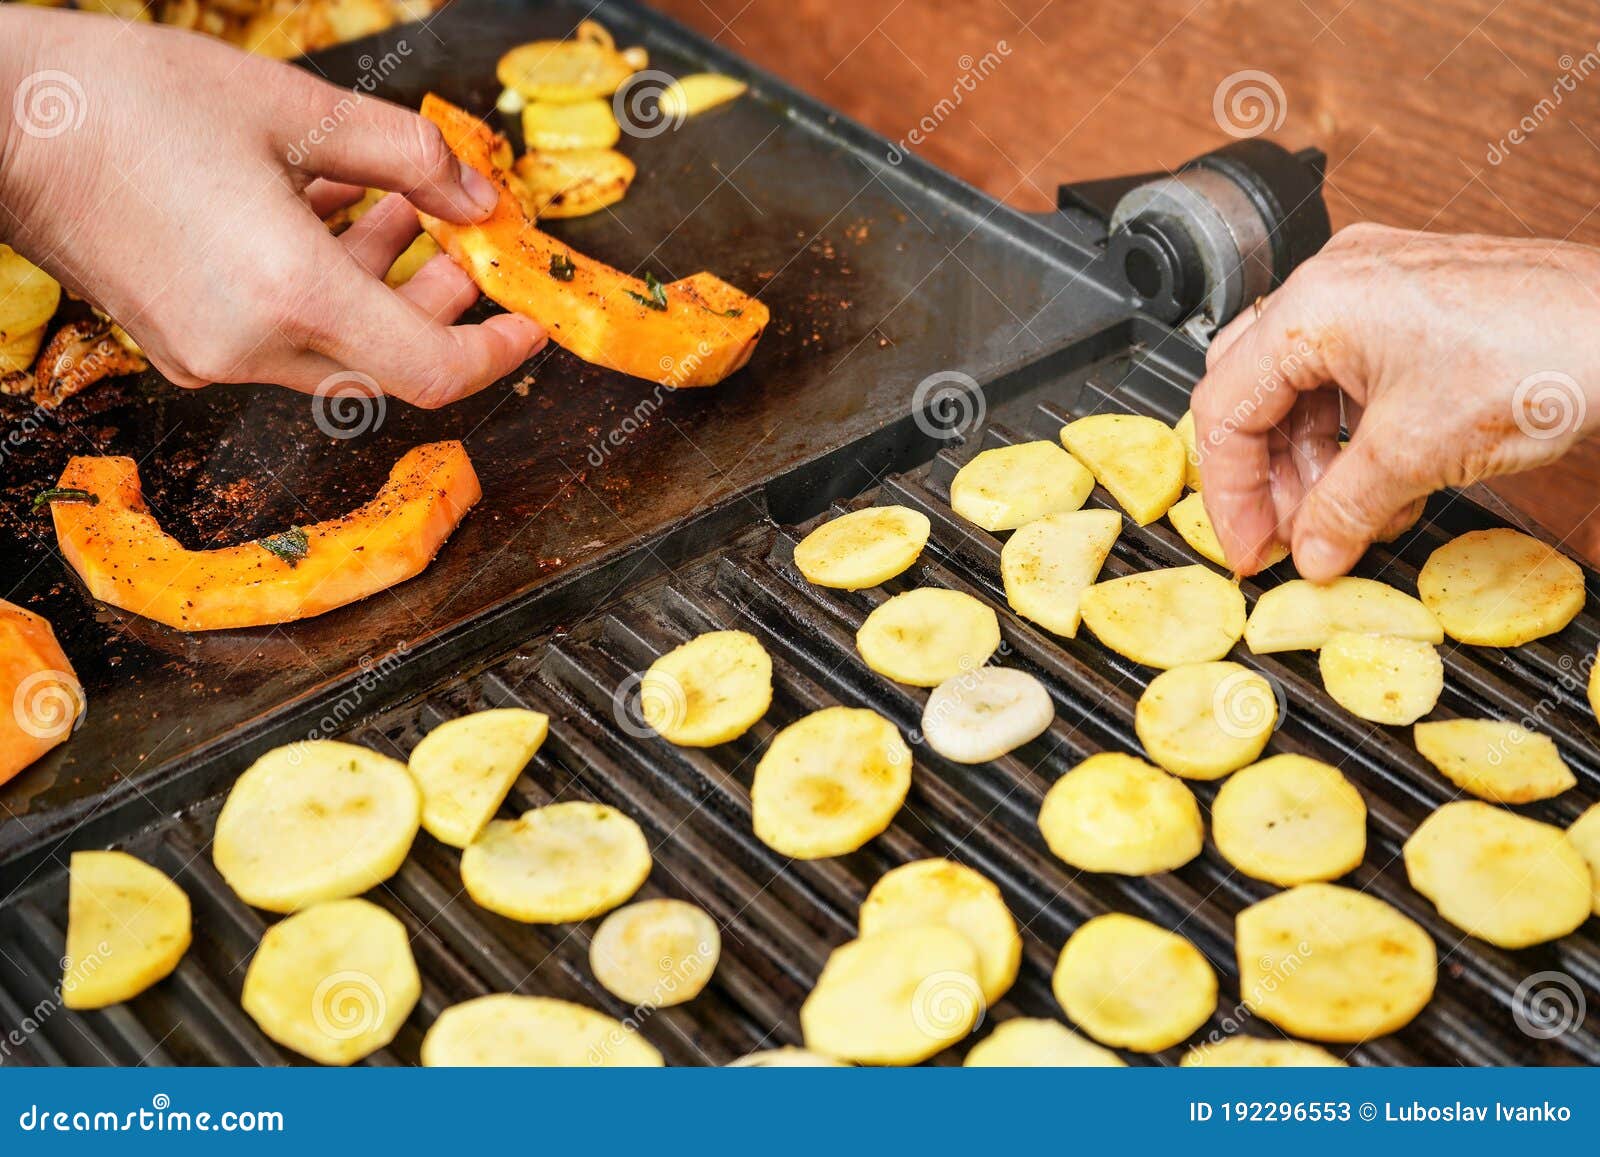 https://thumbs.dreamstime.com/z/orange-butternut-squash-pieces-grilled-electric-grill-detail-woman-hands-moving-smoking-vegetables-blurred-potato-chips-192296553.jpg